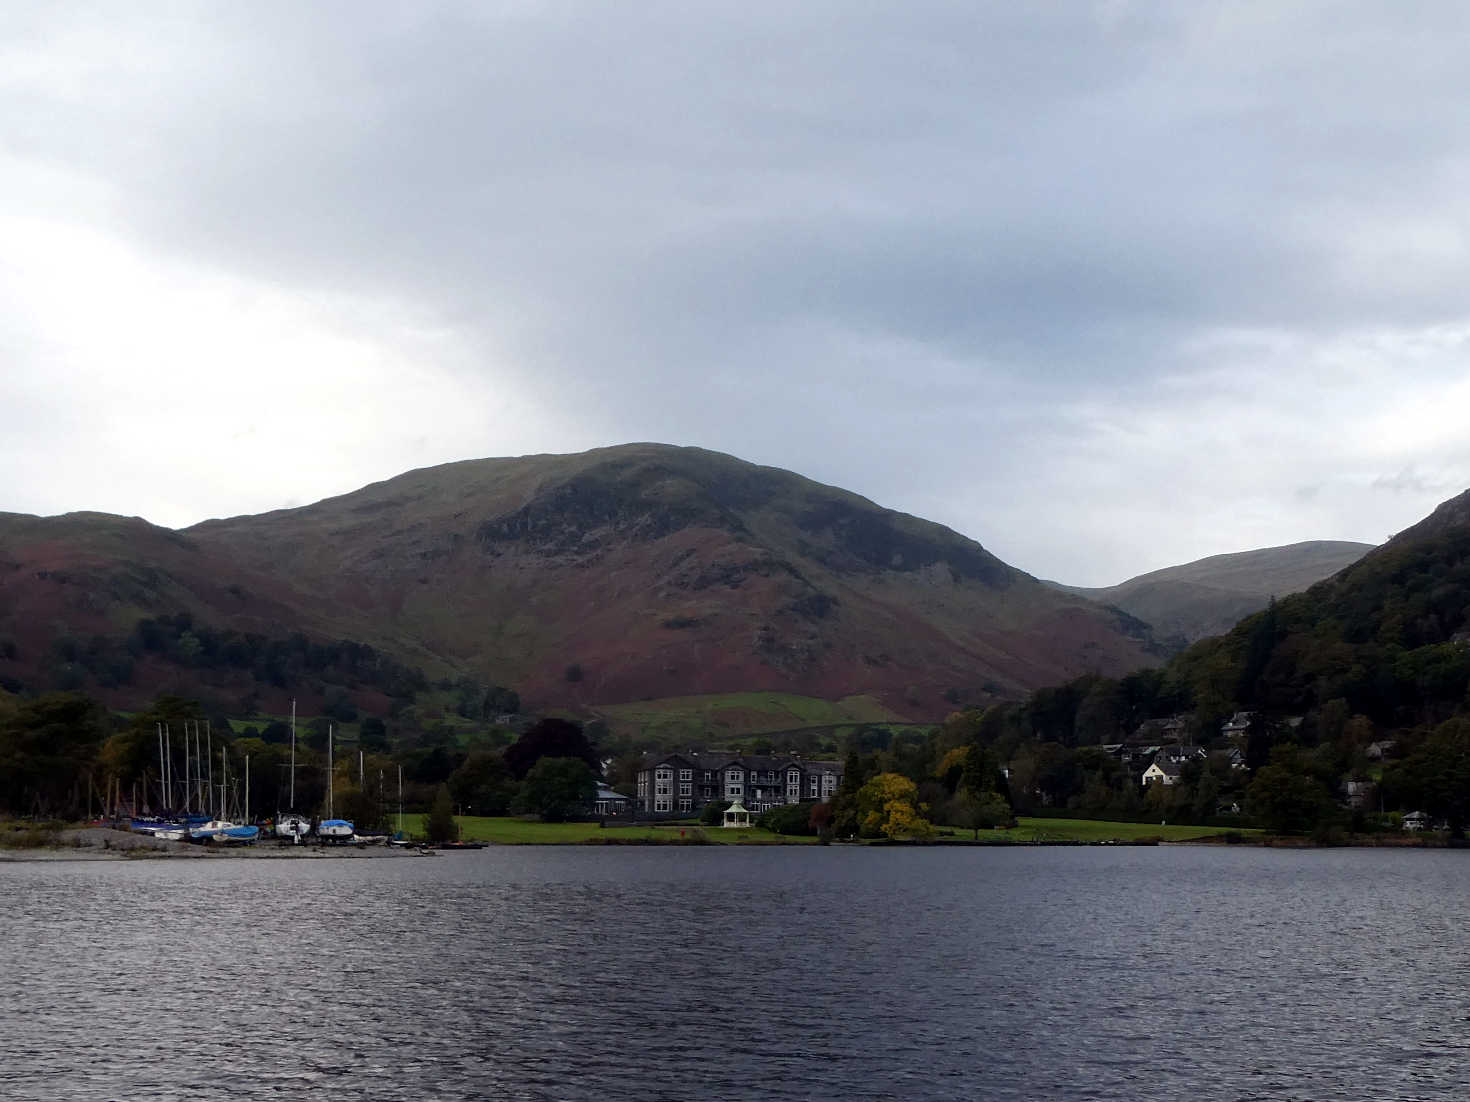 first glimps of Glenridding